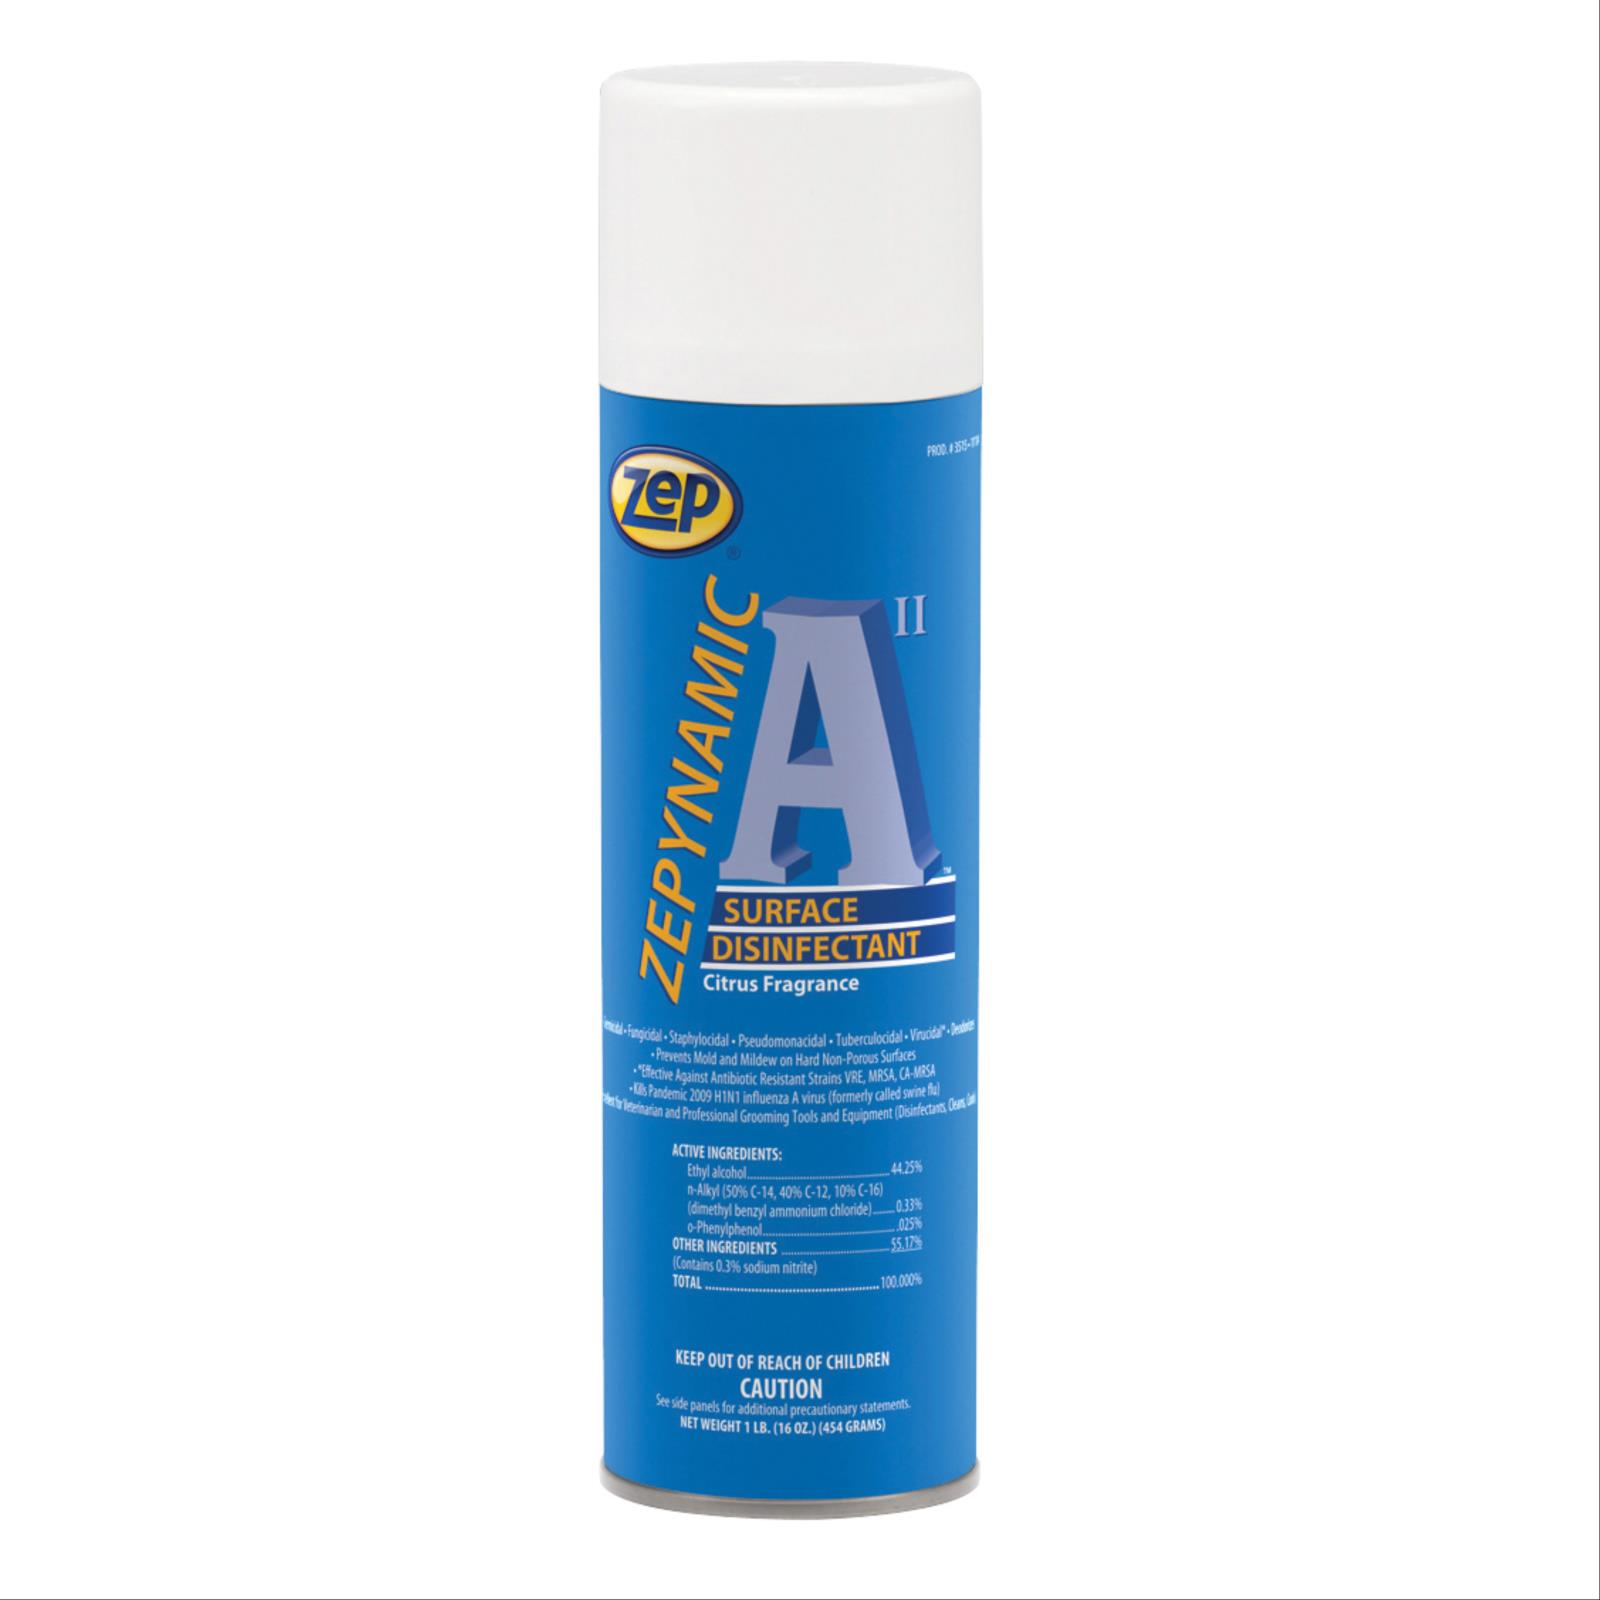 Zepnaymic A II surface disinfectant